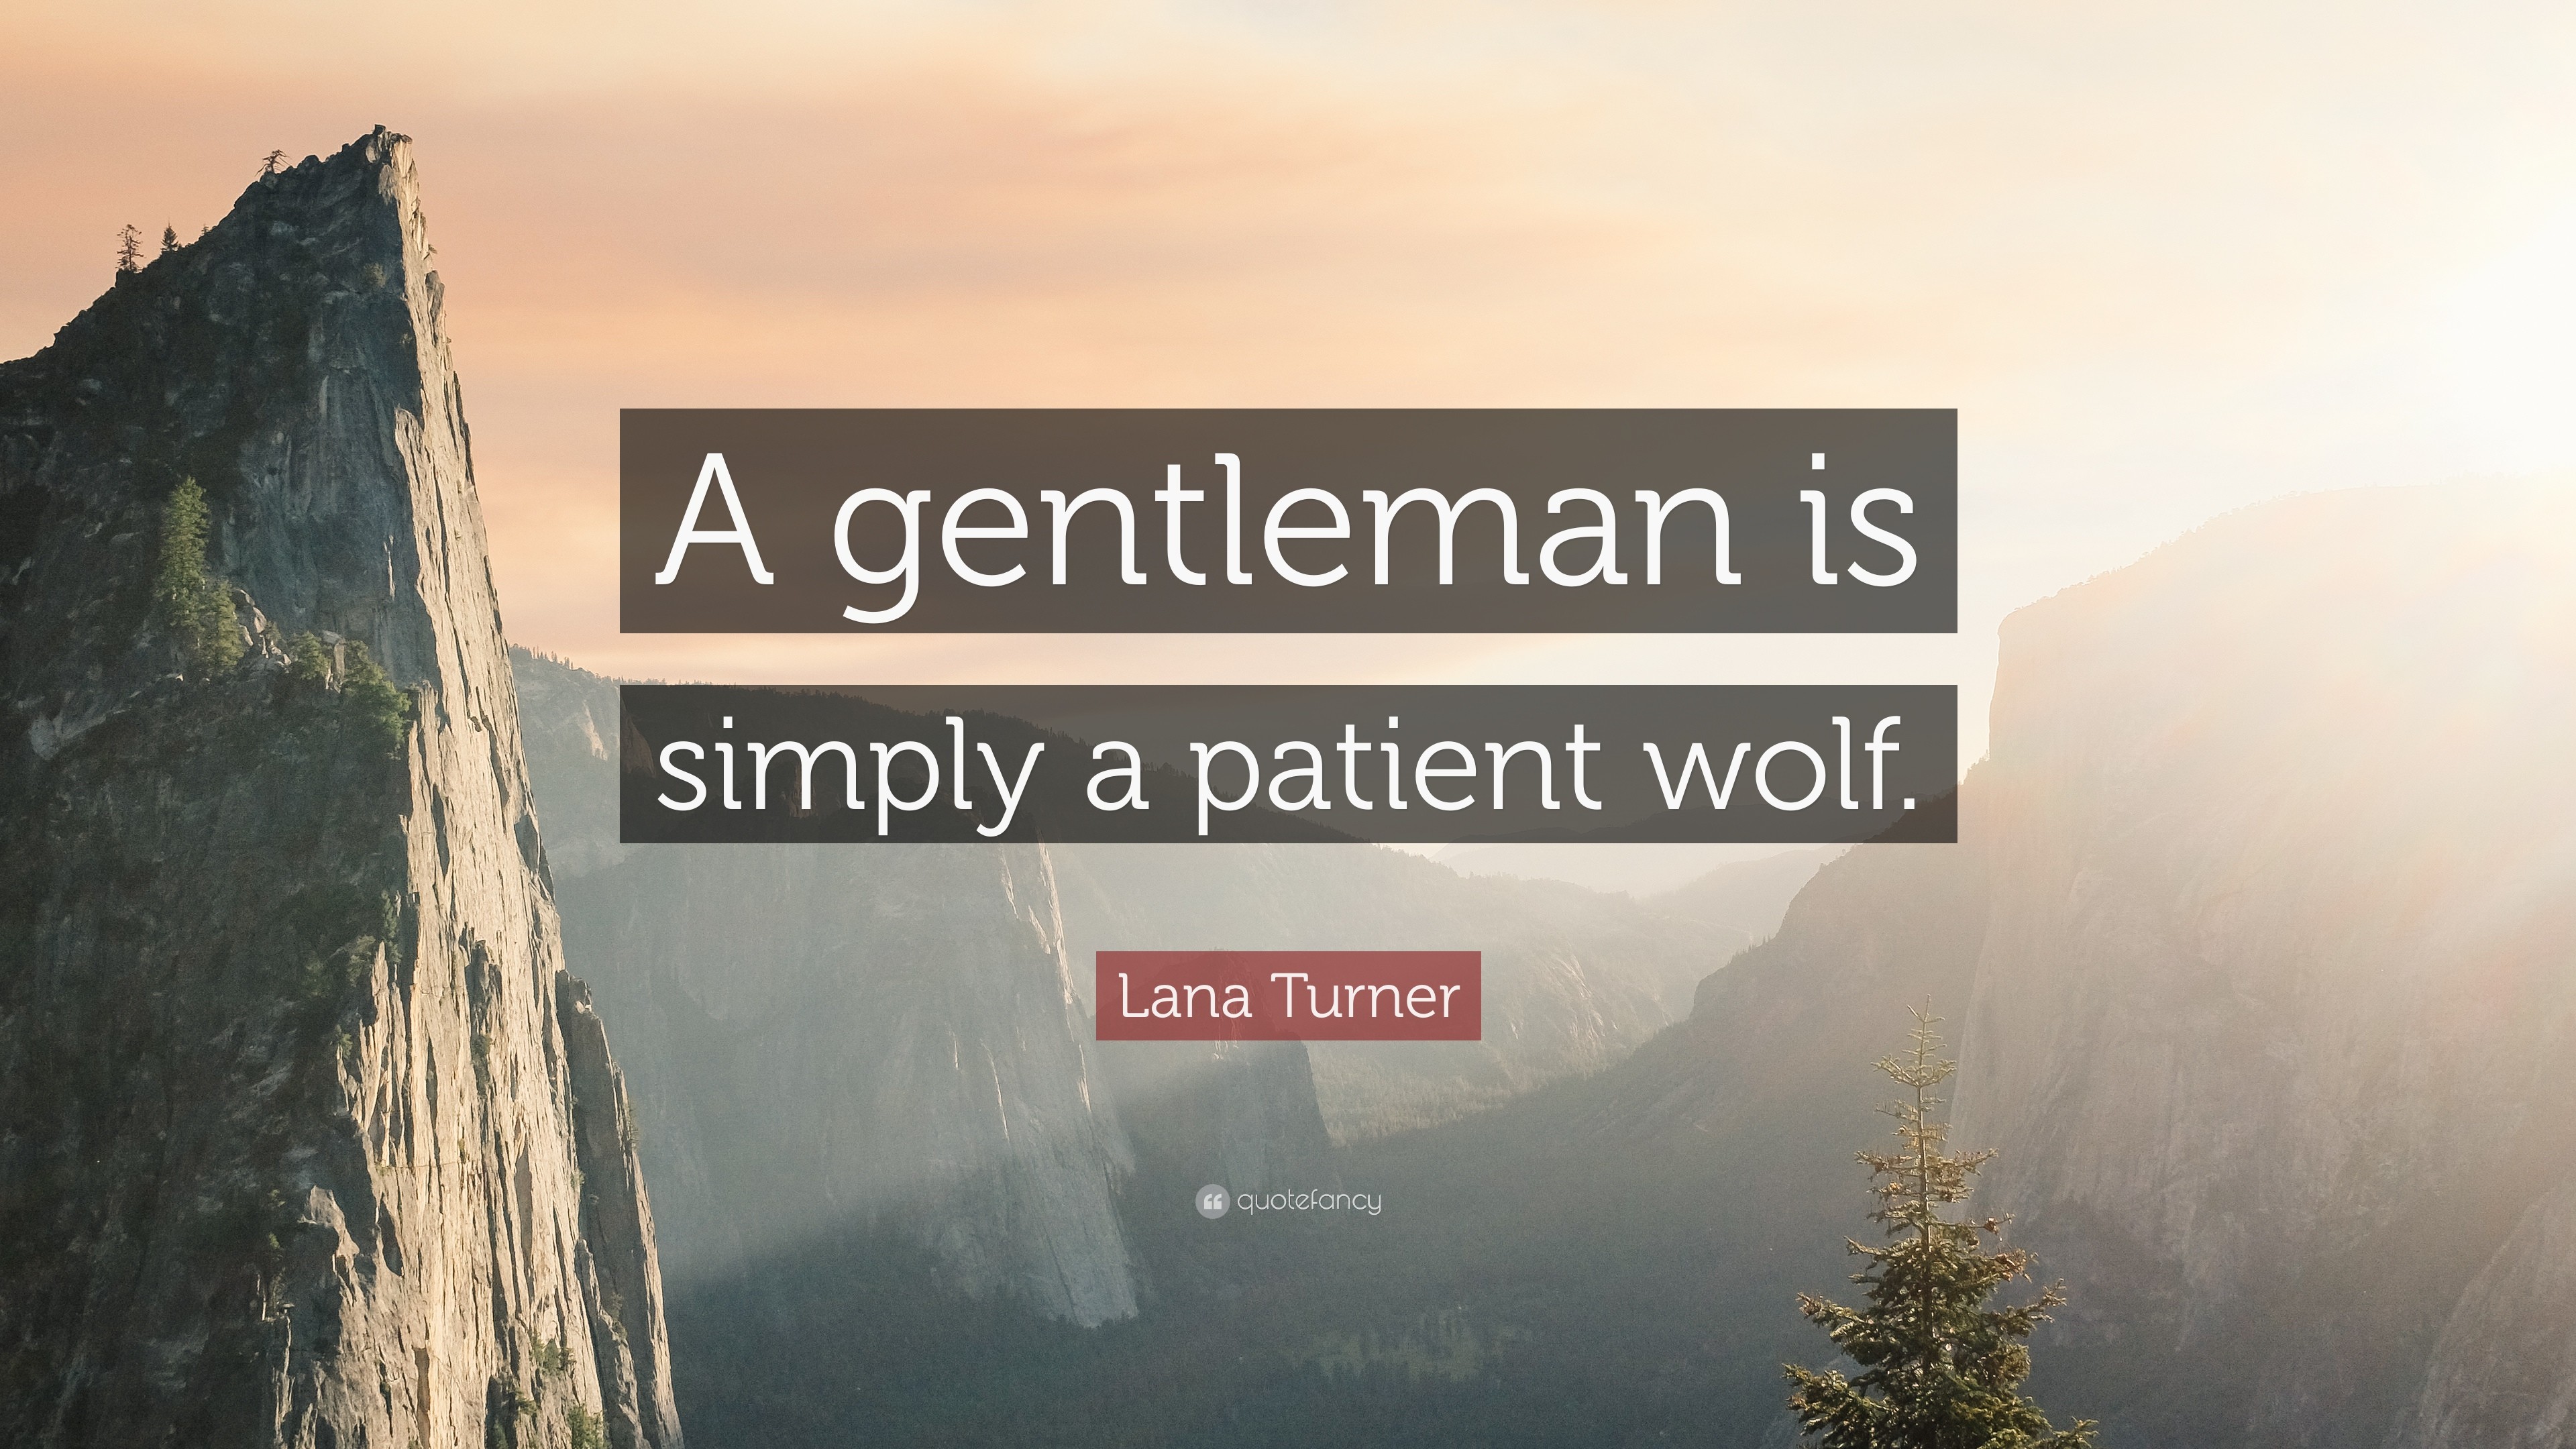 3840x2160 Lana Turner Quote: “A gentleman is simply a patient wolf.”